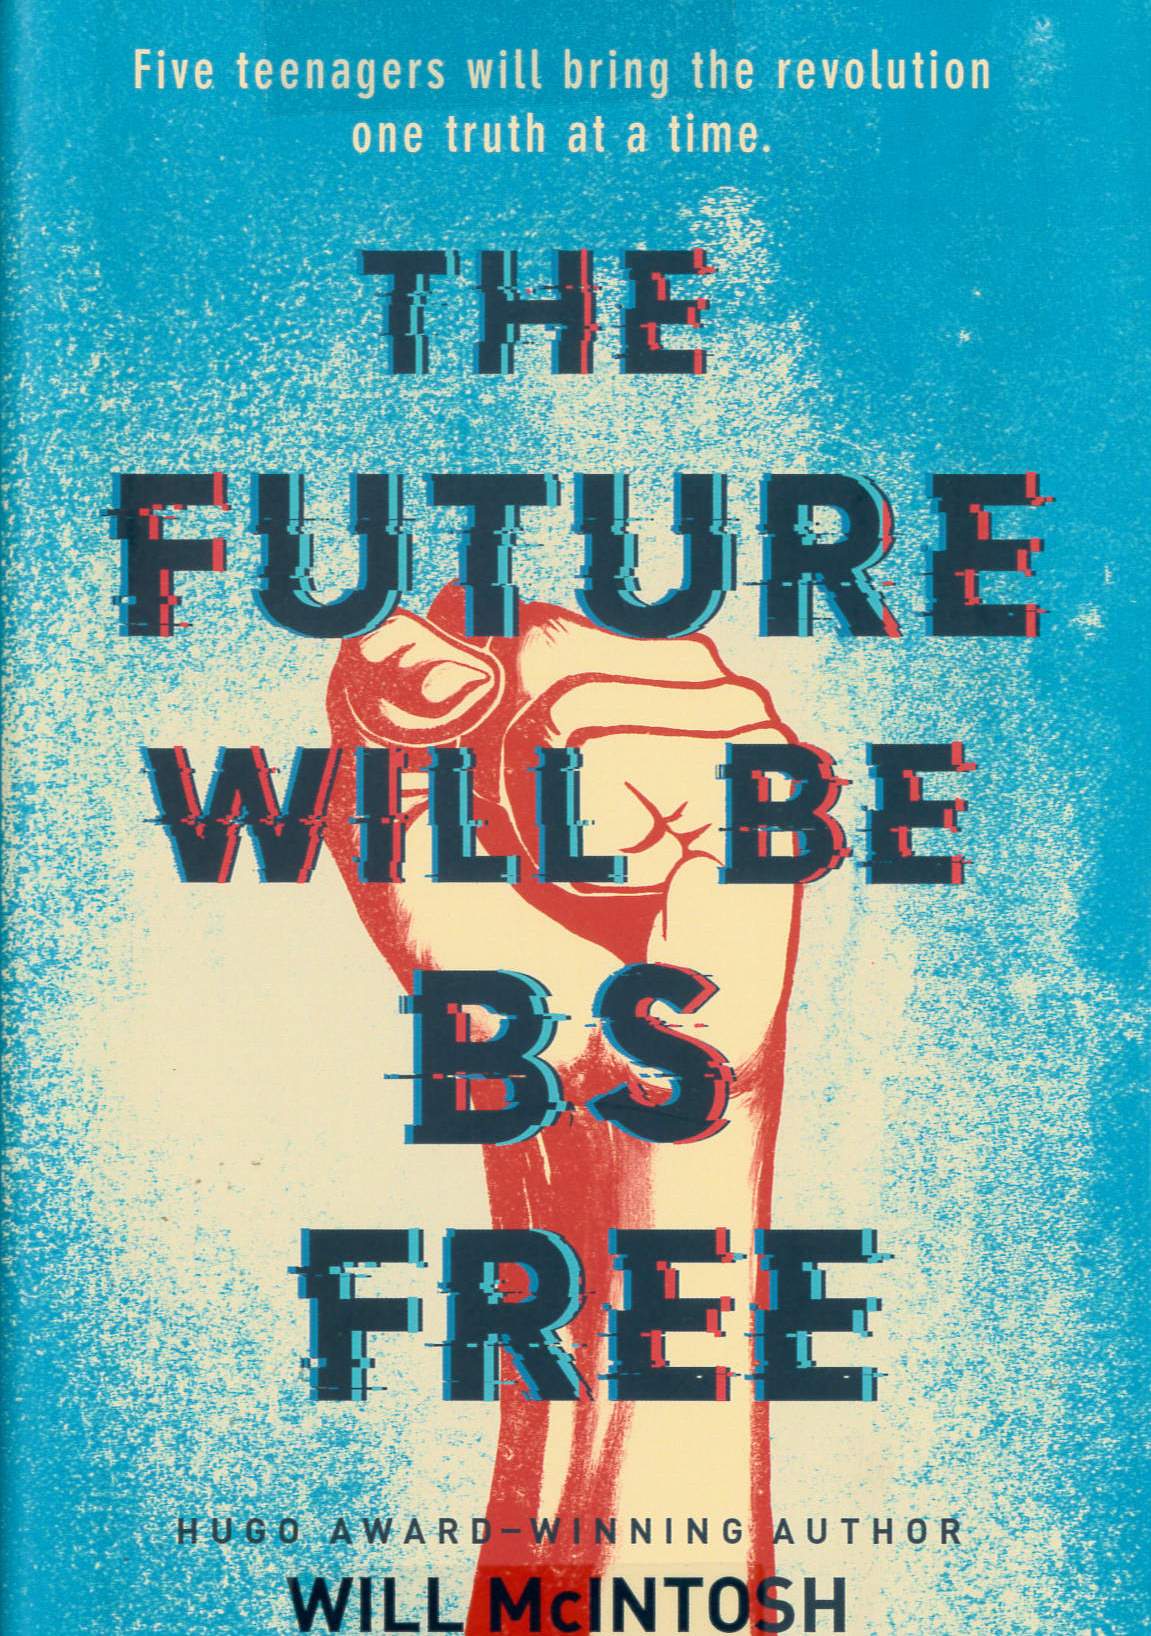 The future will be BS free /